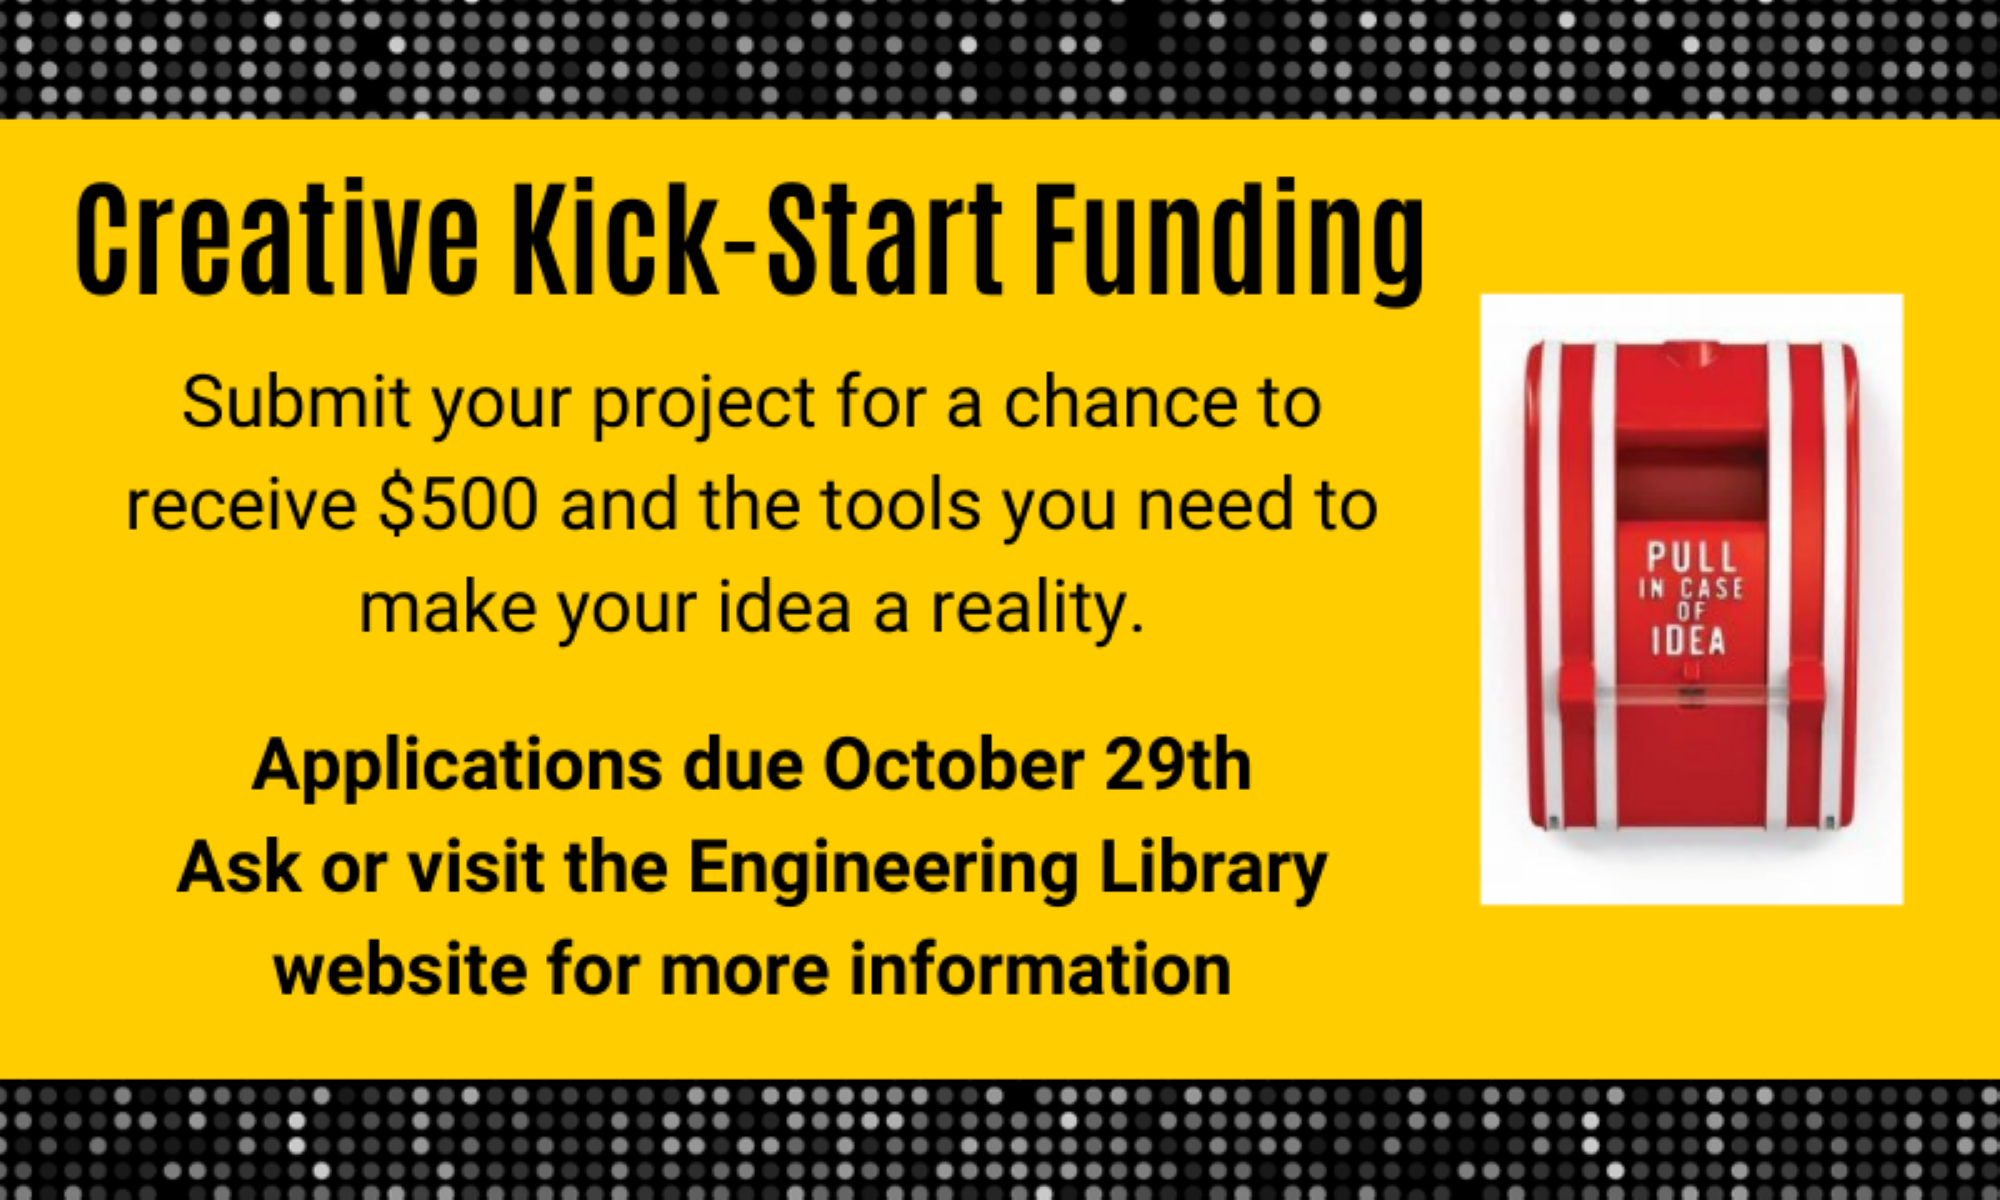 Creative Kick-Start Funding, Application due October 29th, Visit Engineering Library website for more information